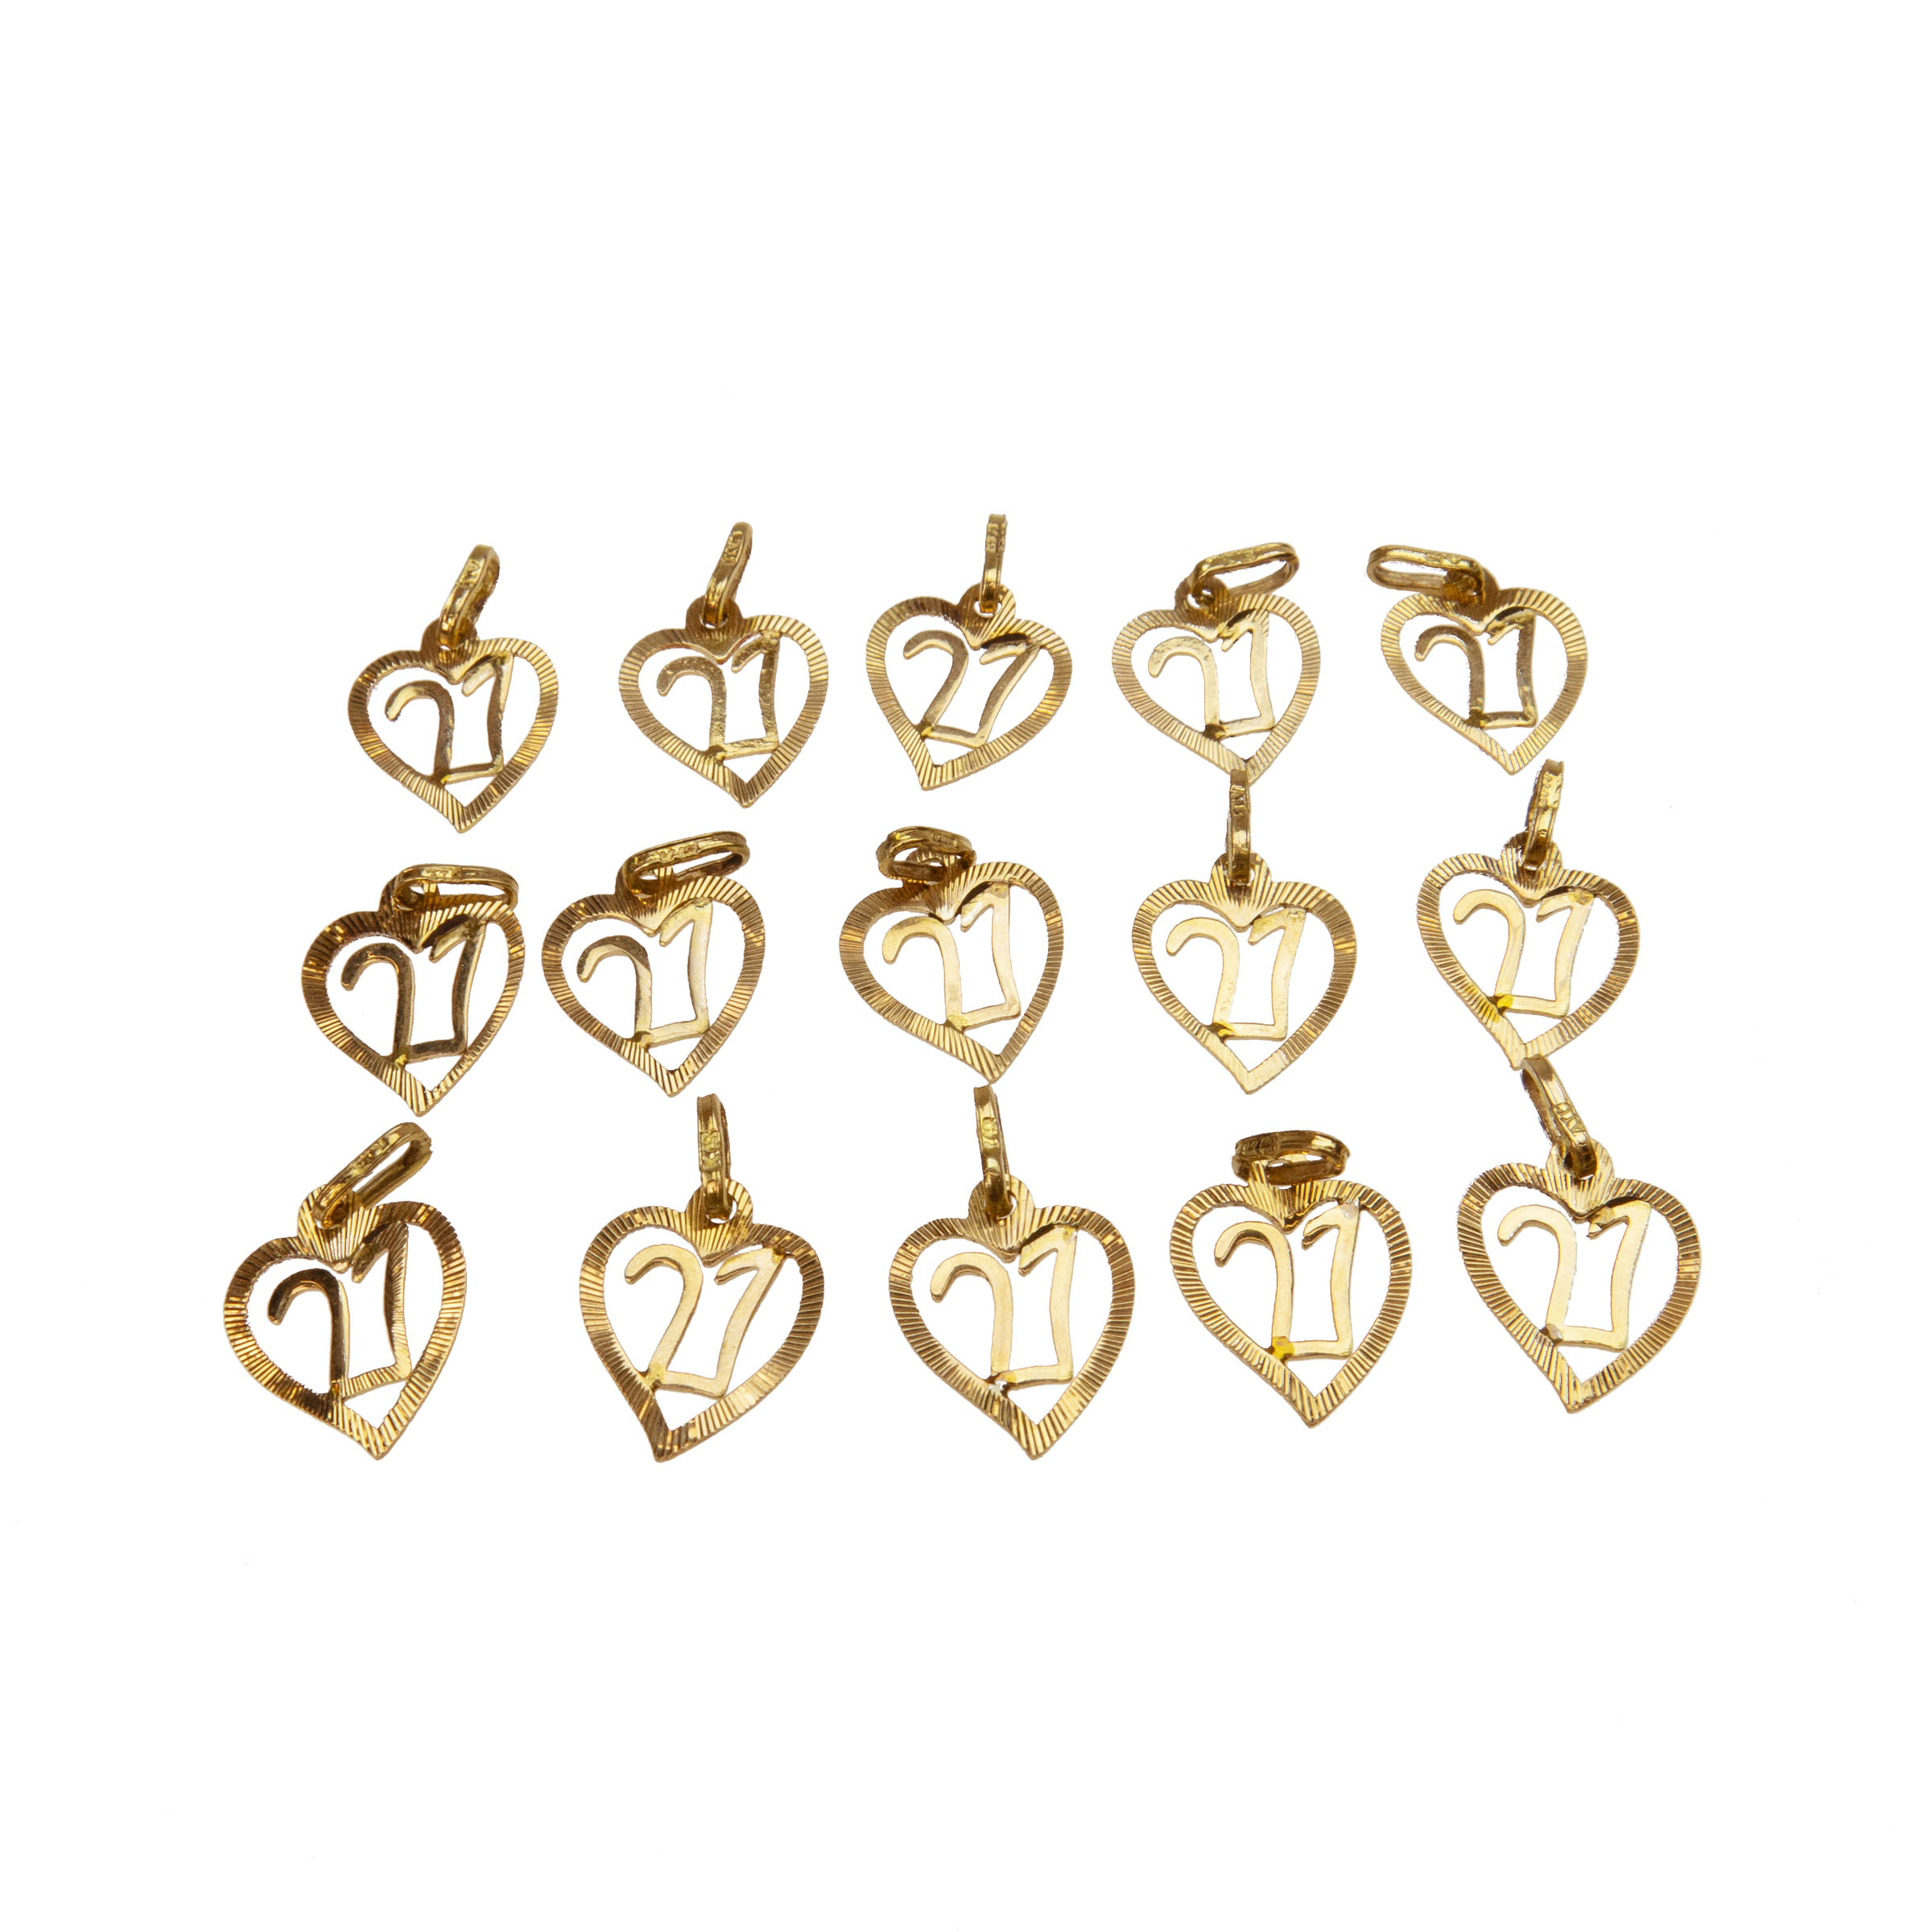 15 X 18K Yellow Gold Heart Shaped Charms